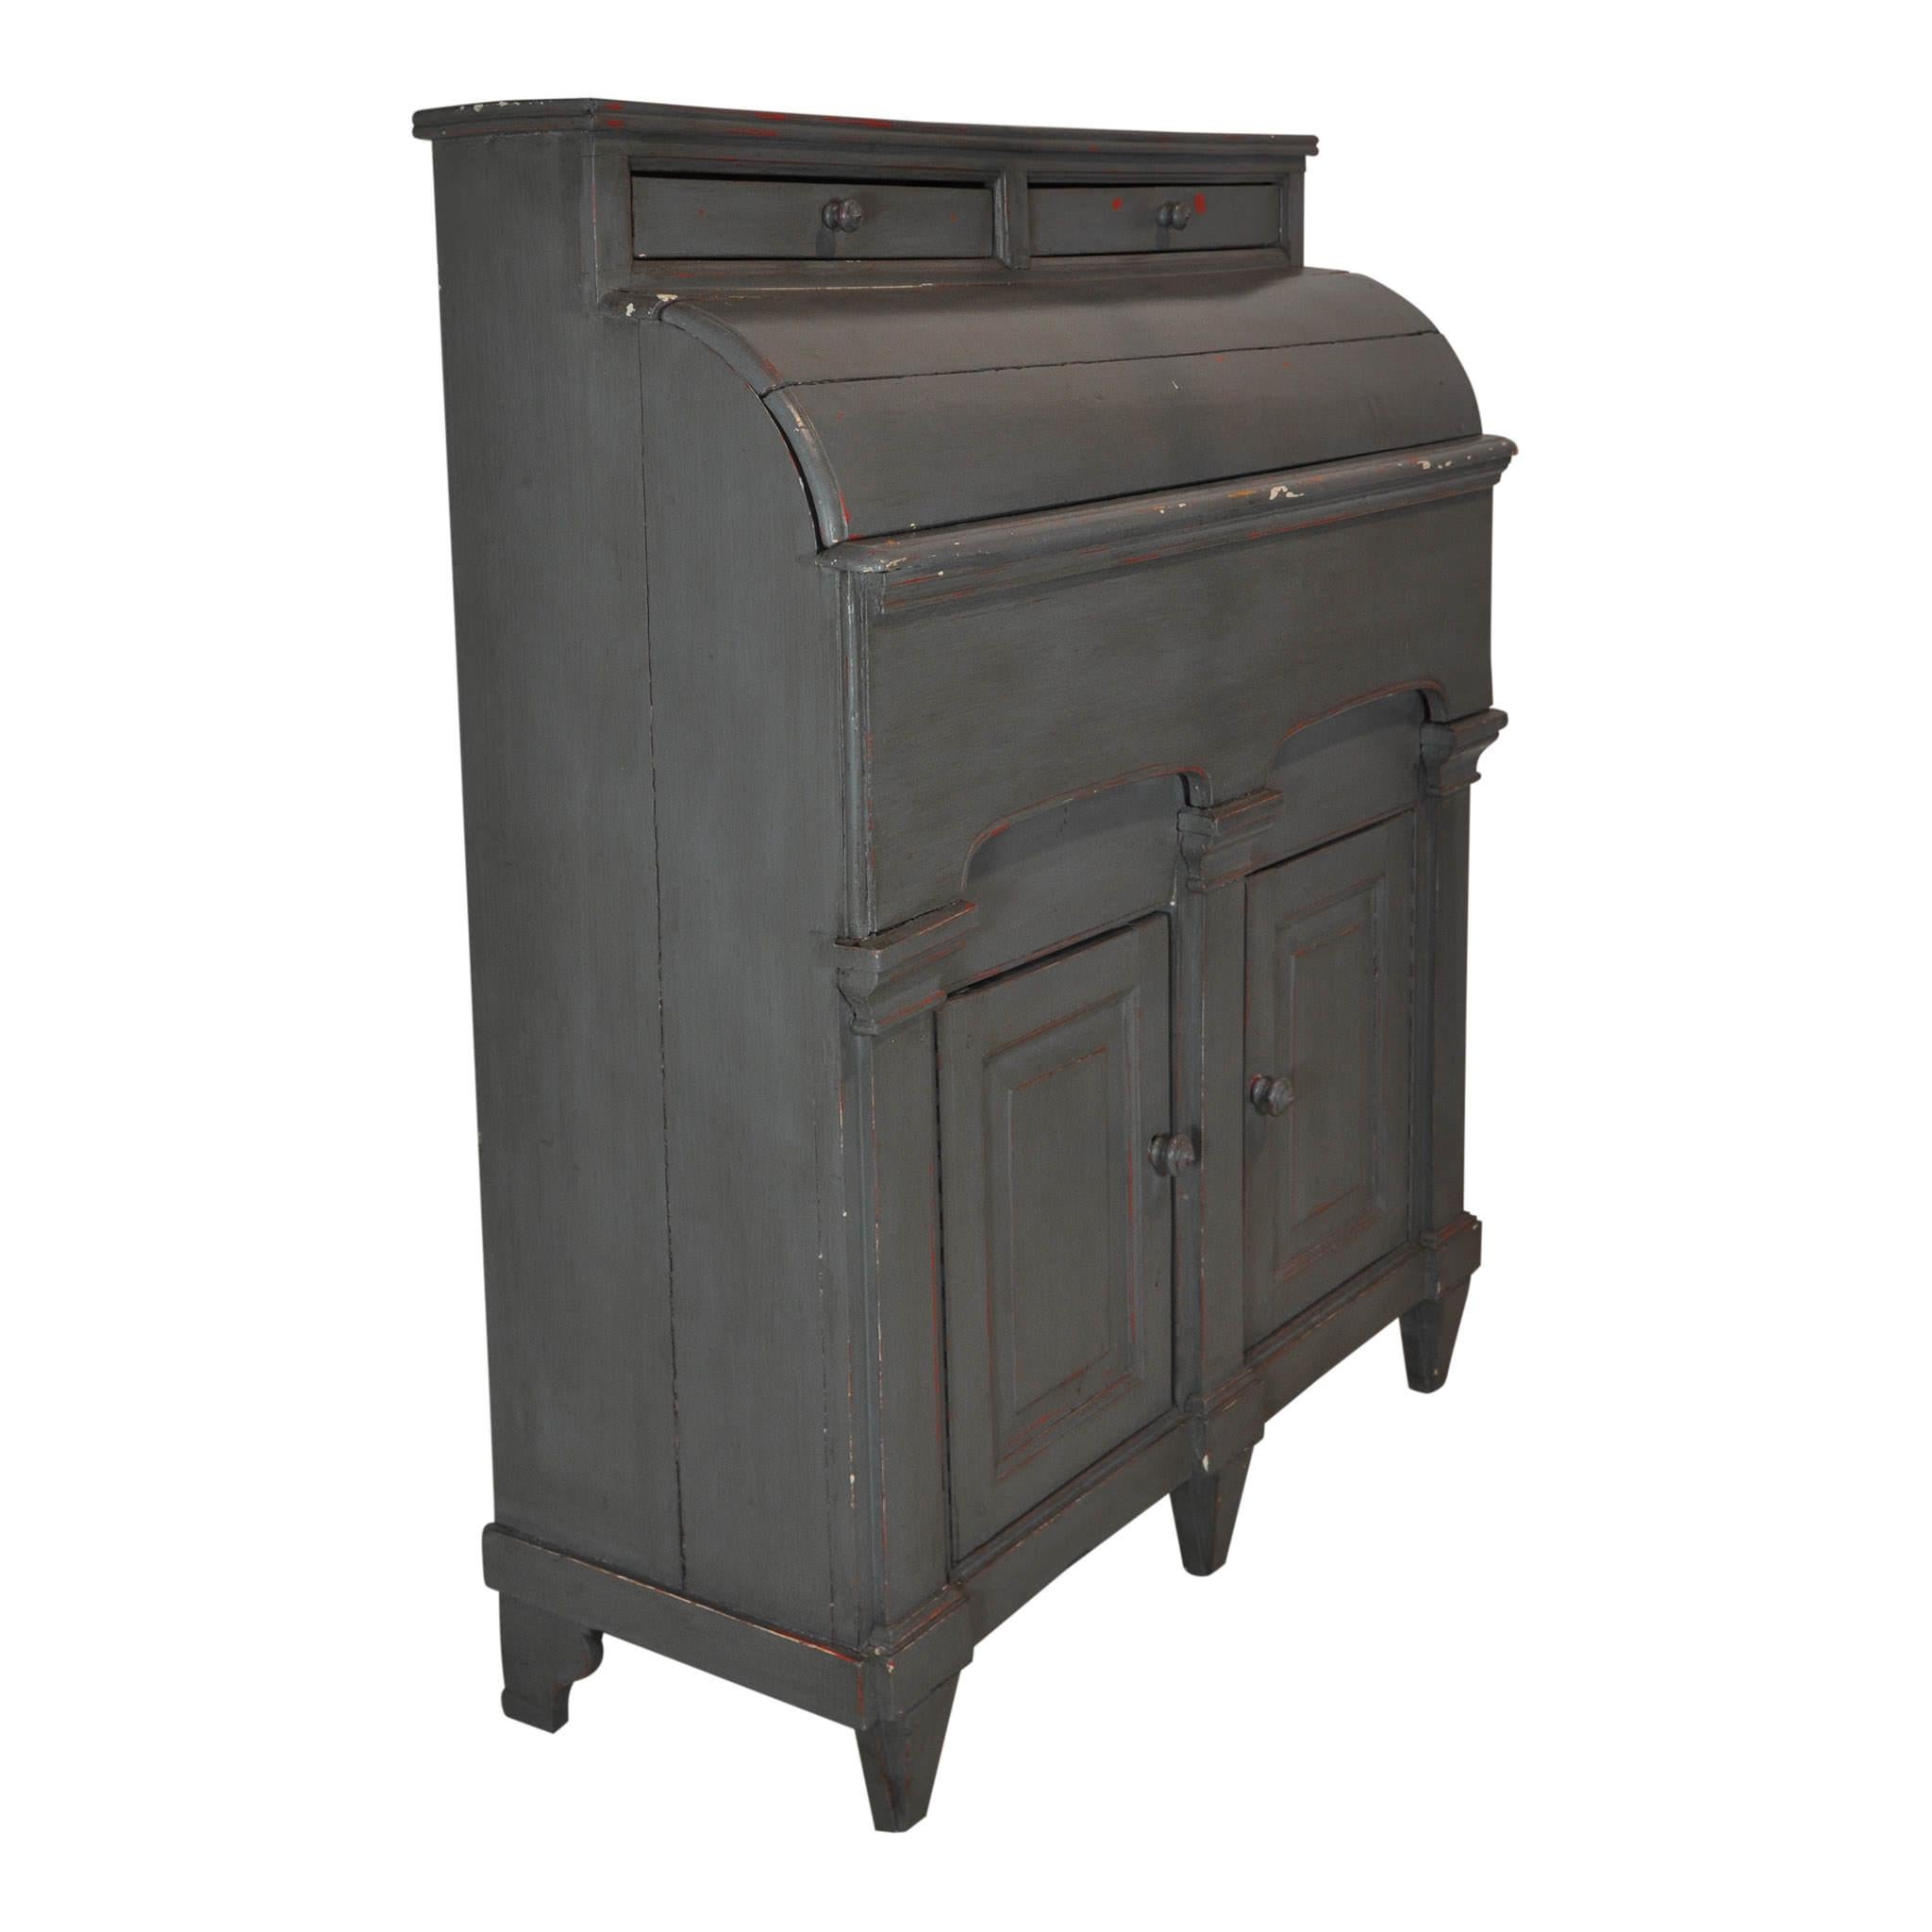 European Painted Pine Cabinet with Storage Bins, circa 1900 For Sale